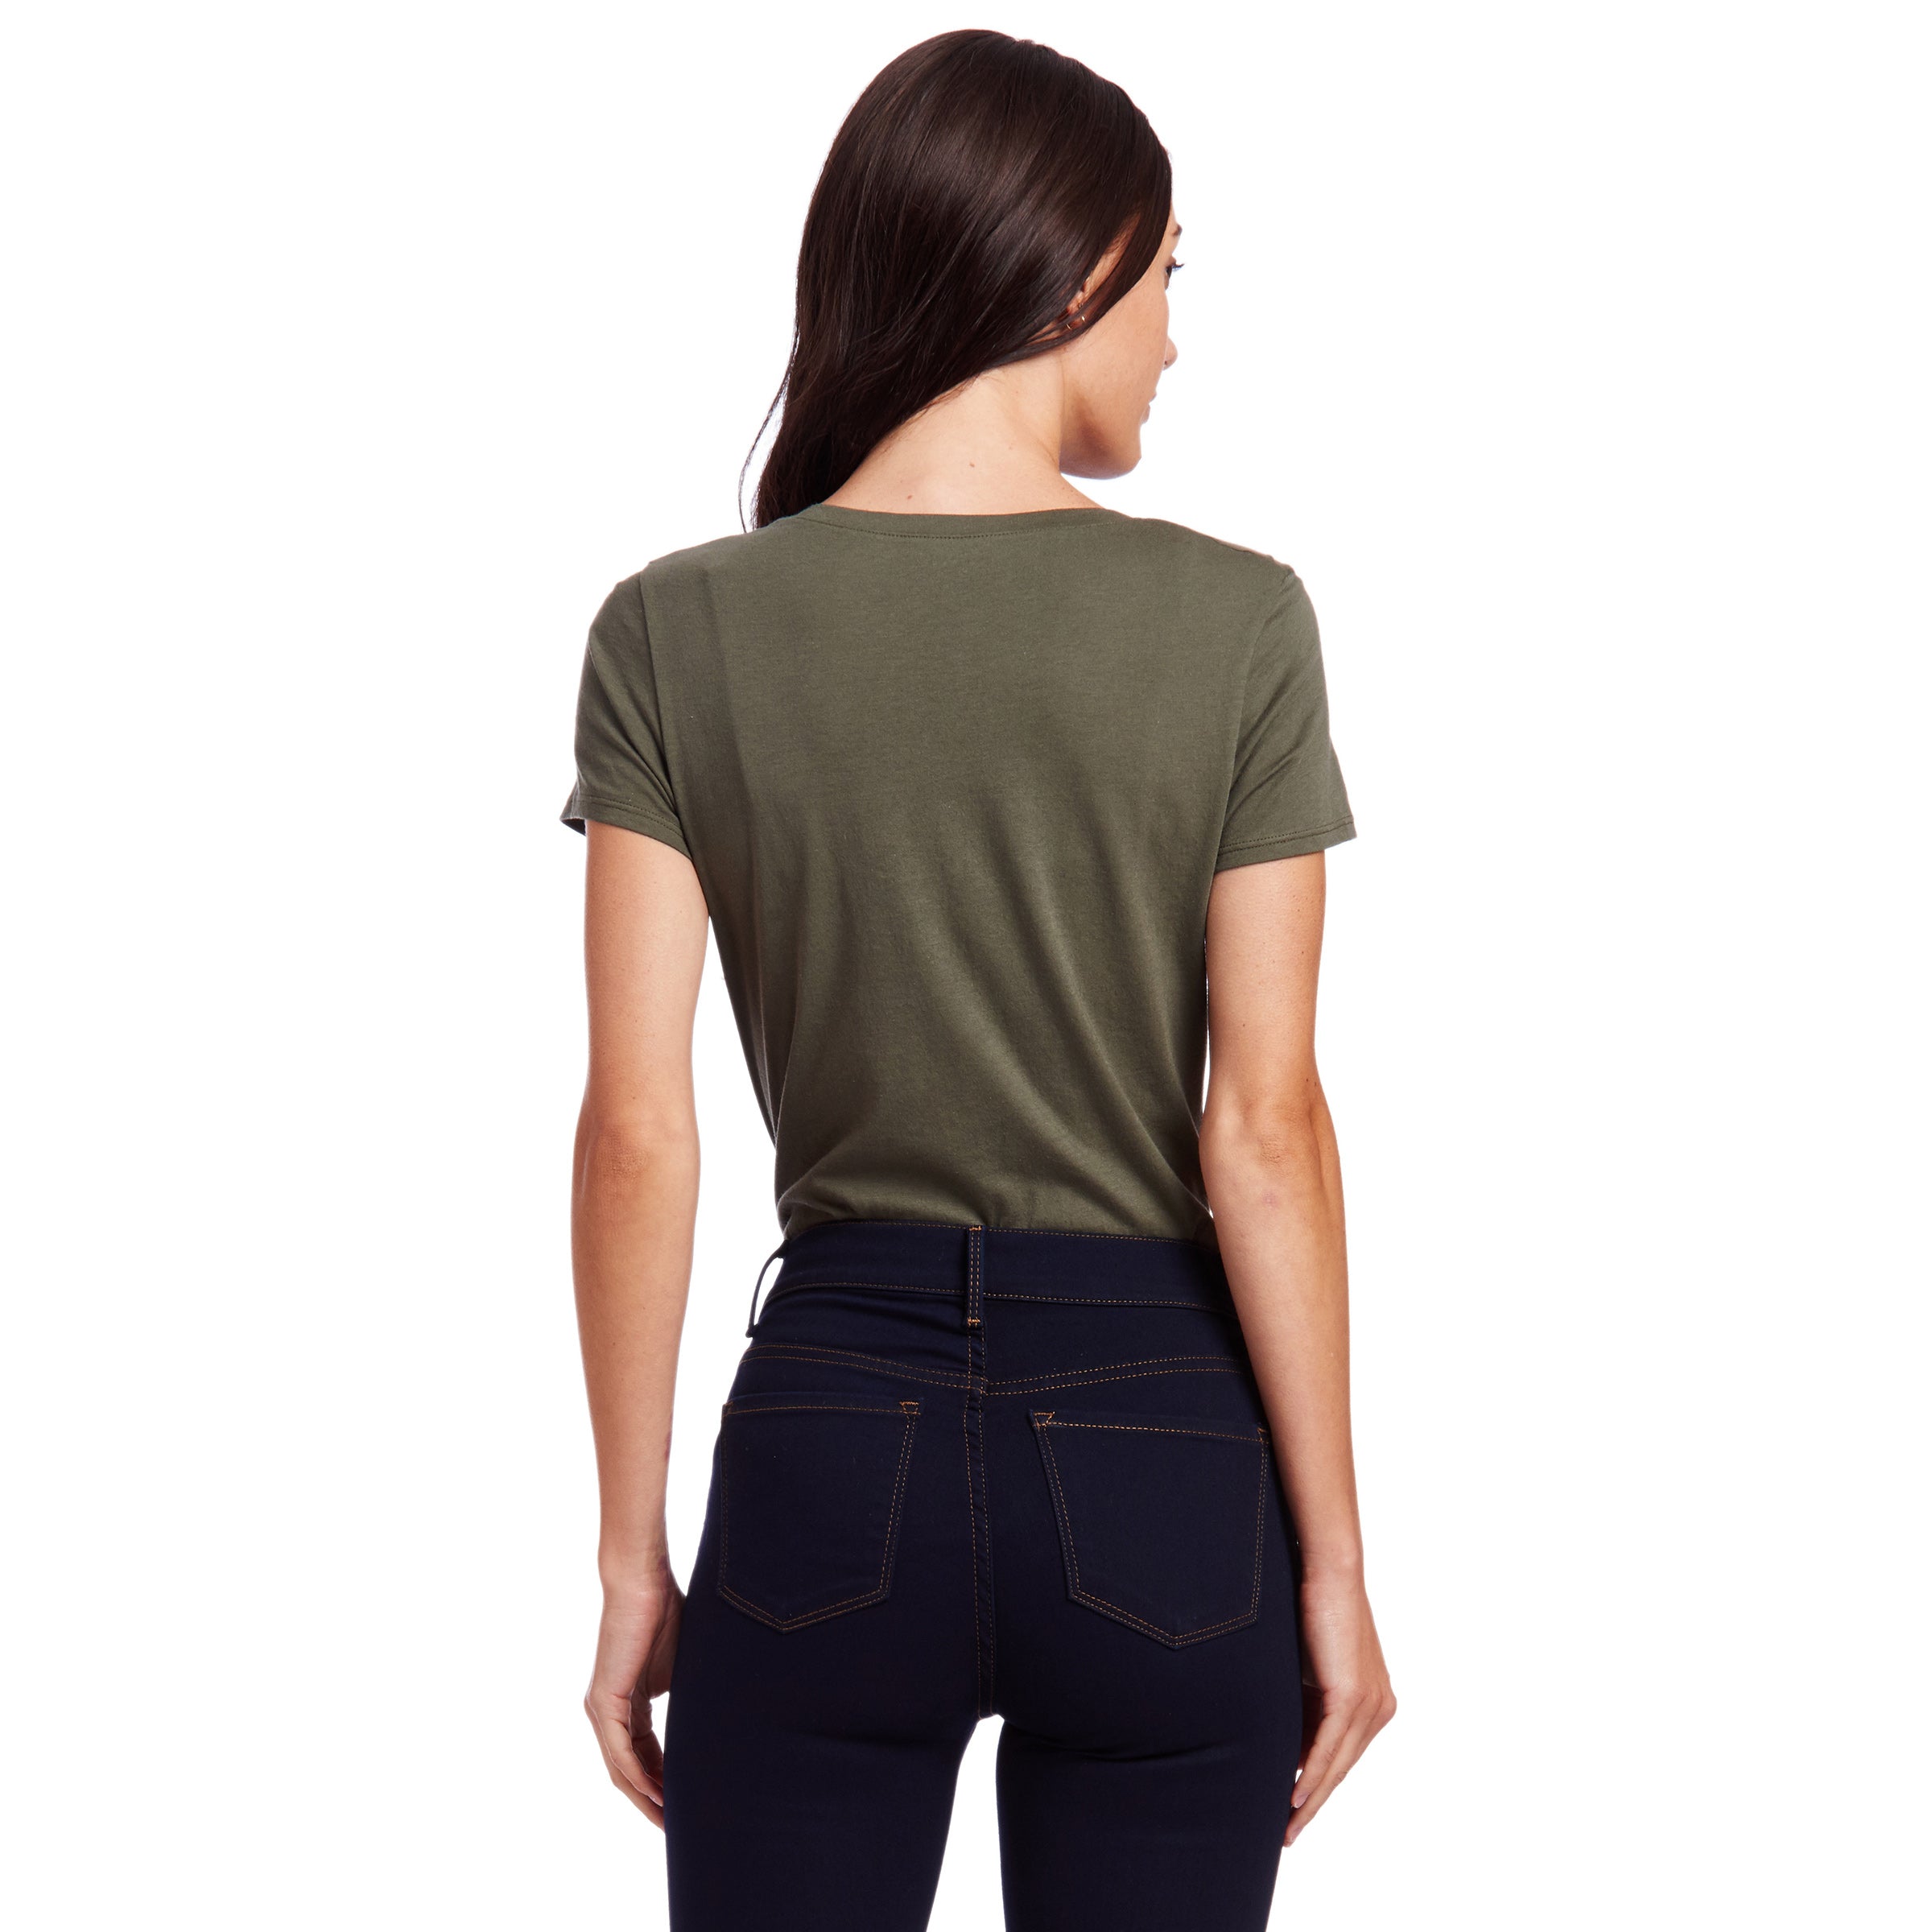 Women wearing Verde militar Fitted V-Neck Marcy Tee